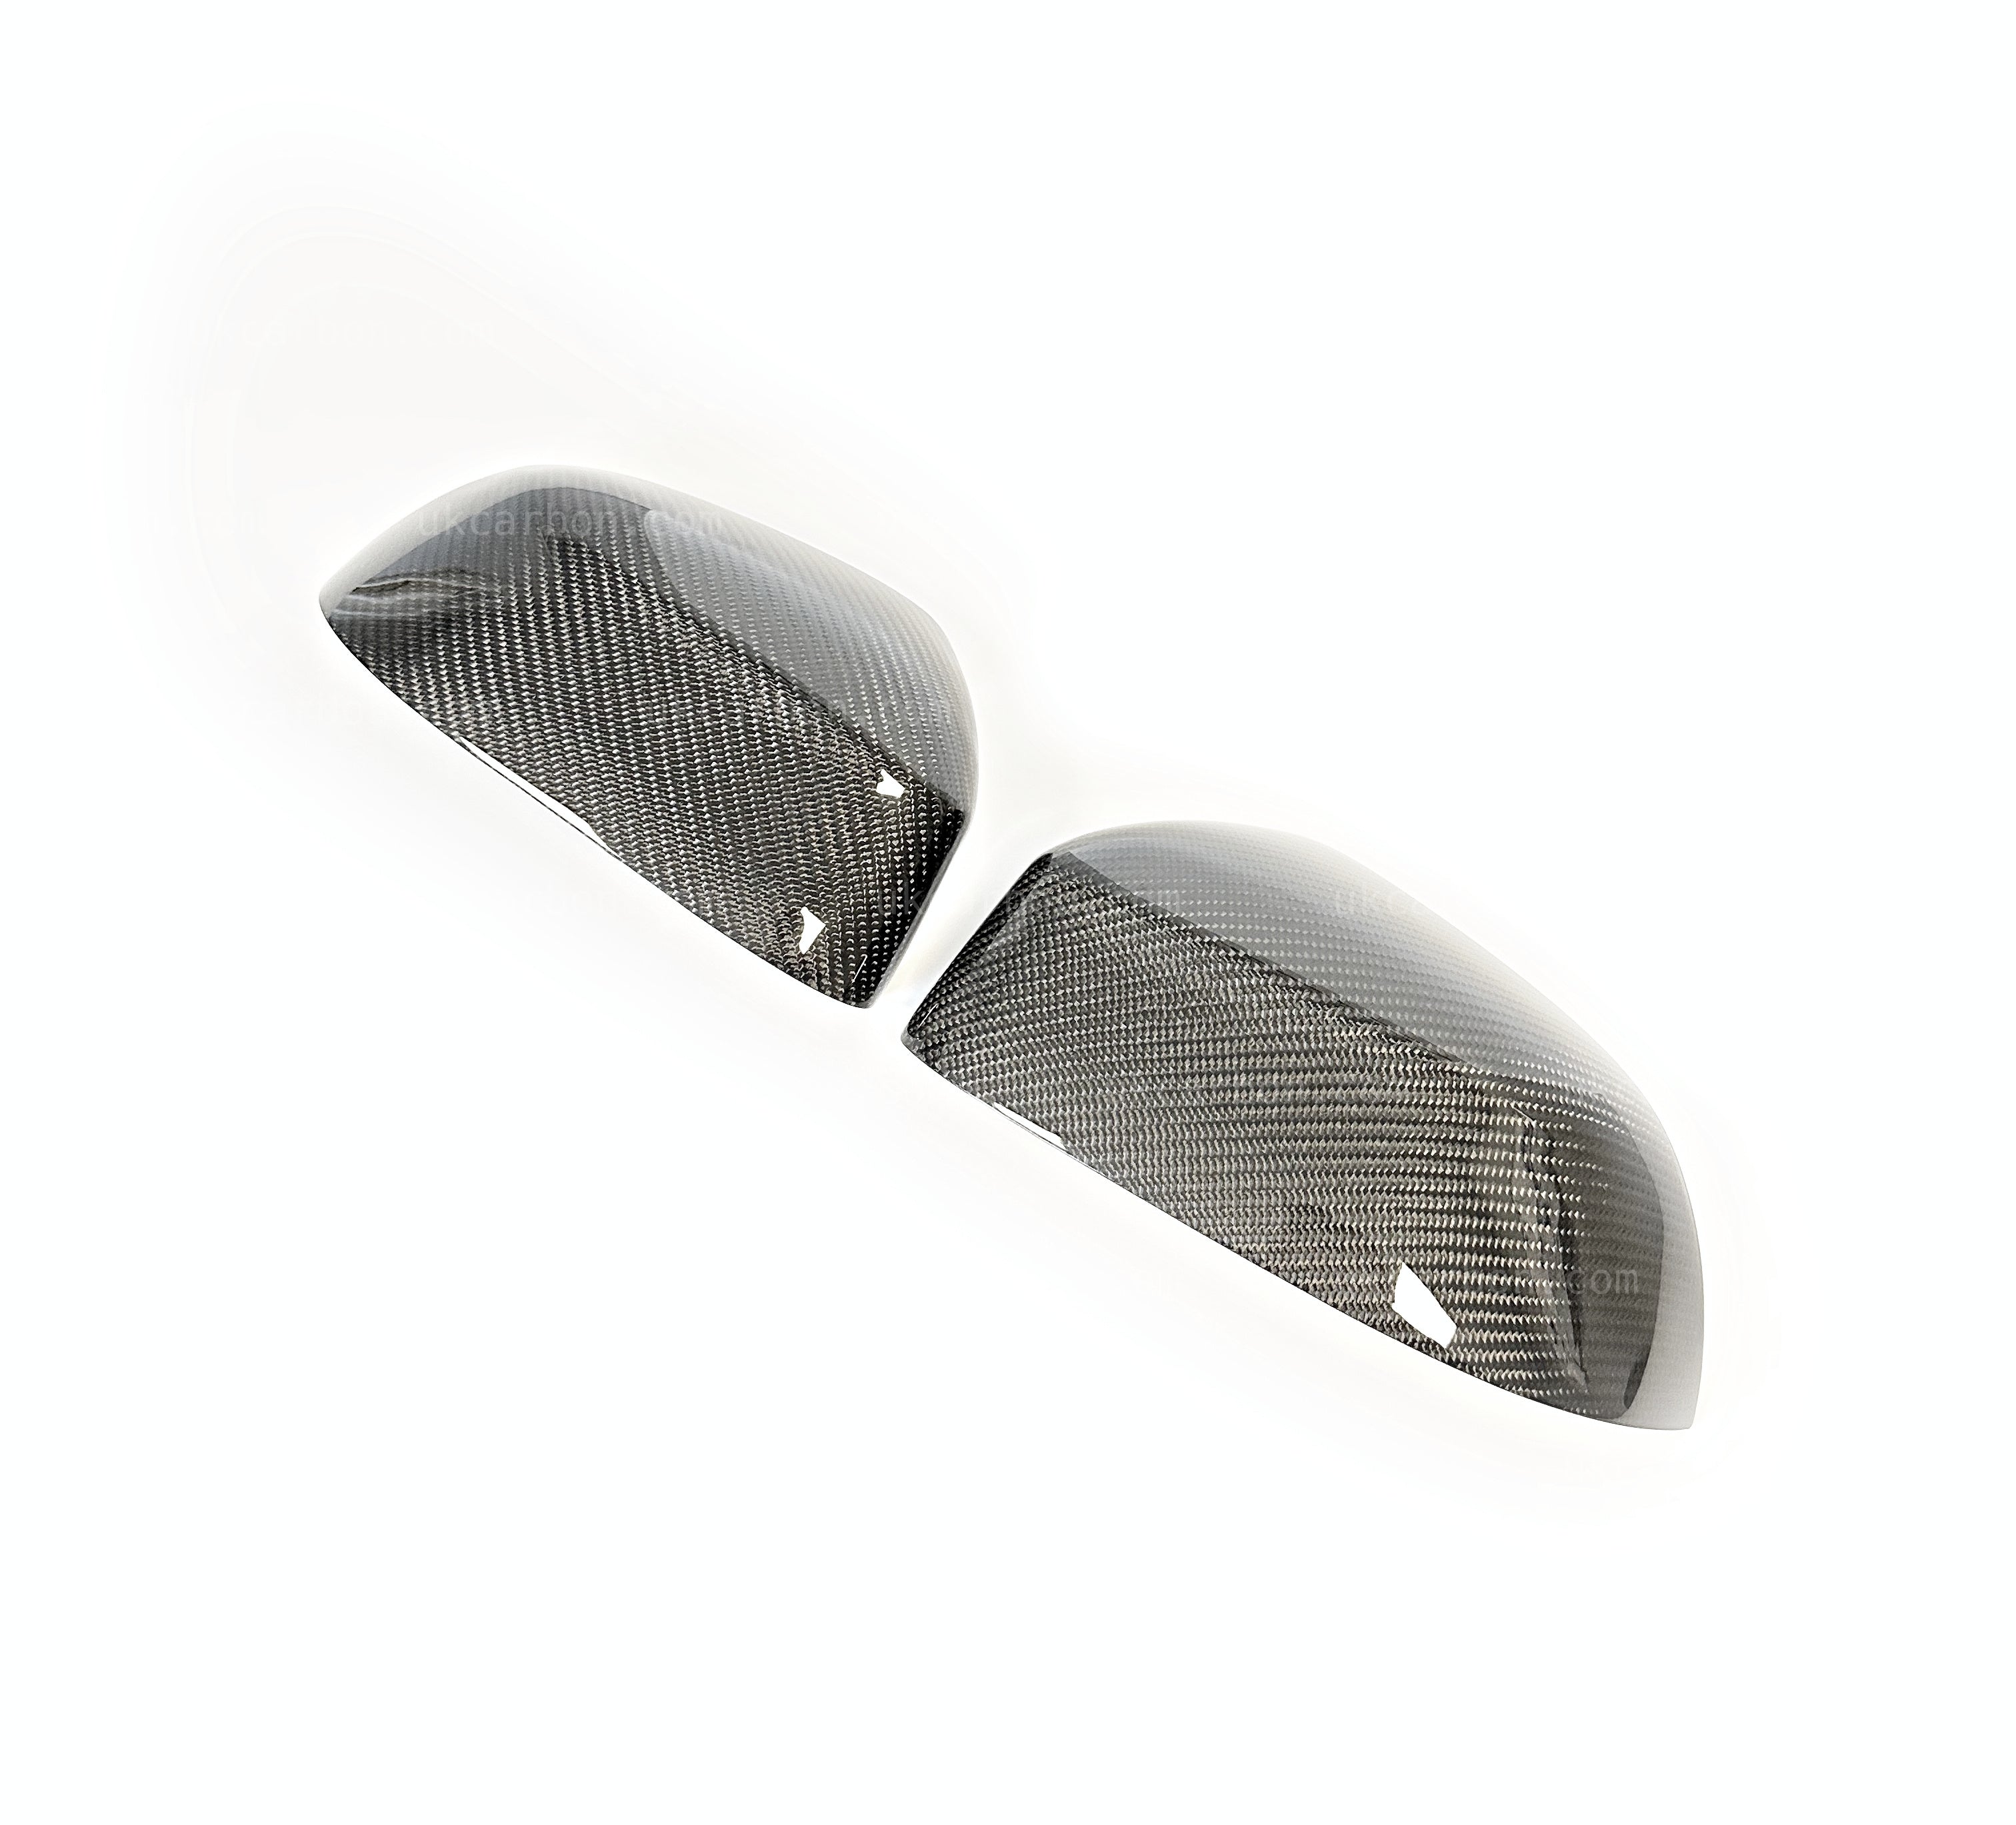 BMW X5 Carbon Wing Mirror Cover Replacements M Performance OEM F15 by UKCarbon